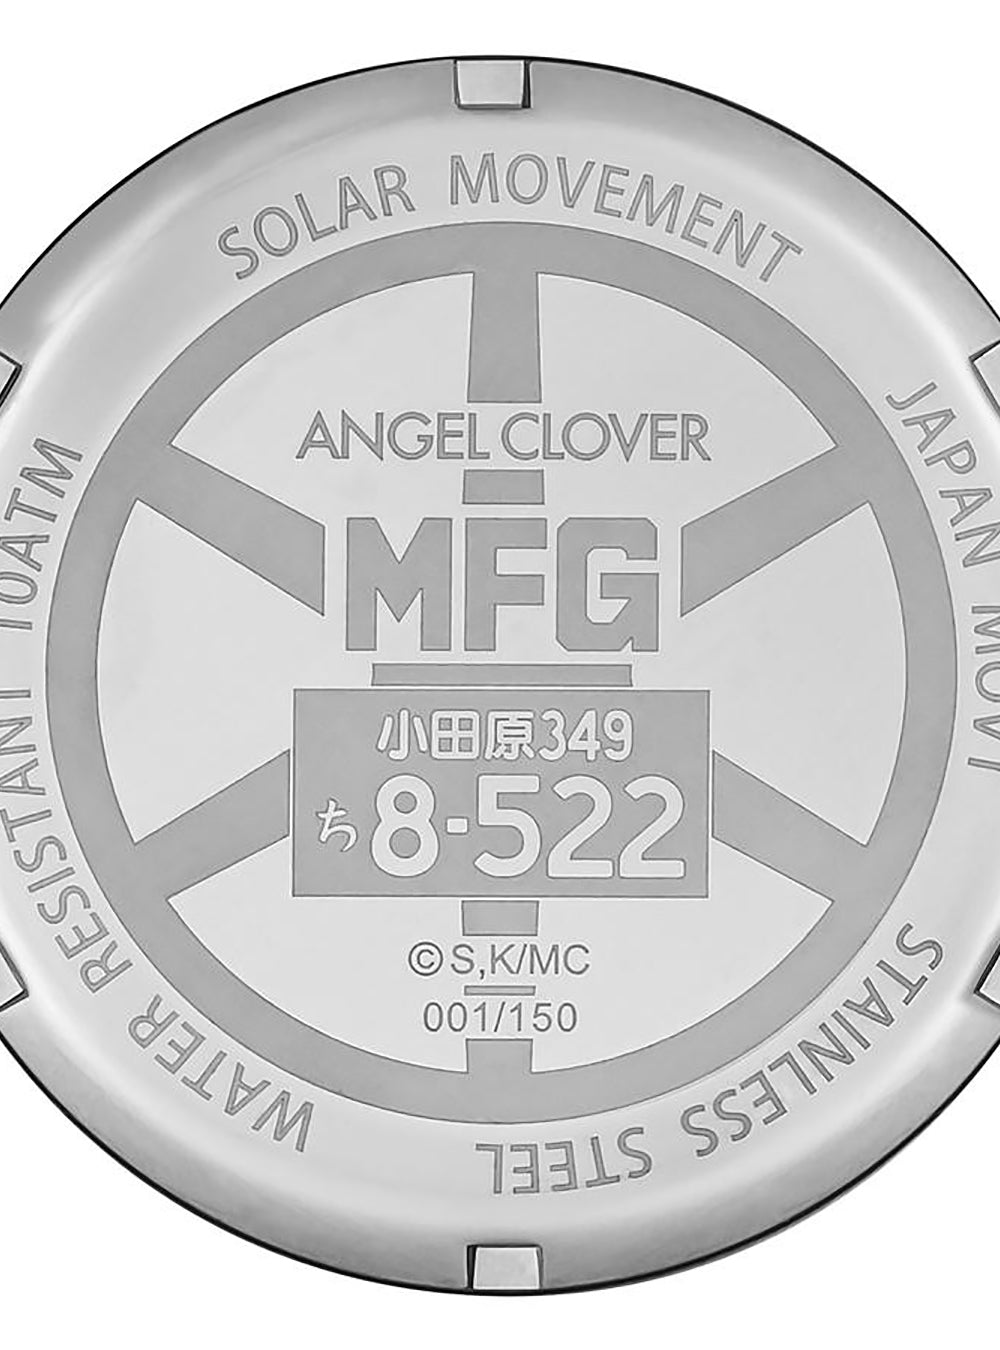 ANGELCLOVER × MF GHOST COLLABORATION WATCH - EXVENTURE SOLAR EVS43MFG-GTR SHUN AIBA NISSAN GT-R MODEL LIMITED EDITIONWRISTWATCHjapan-select